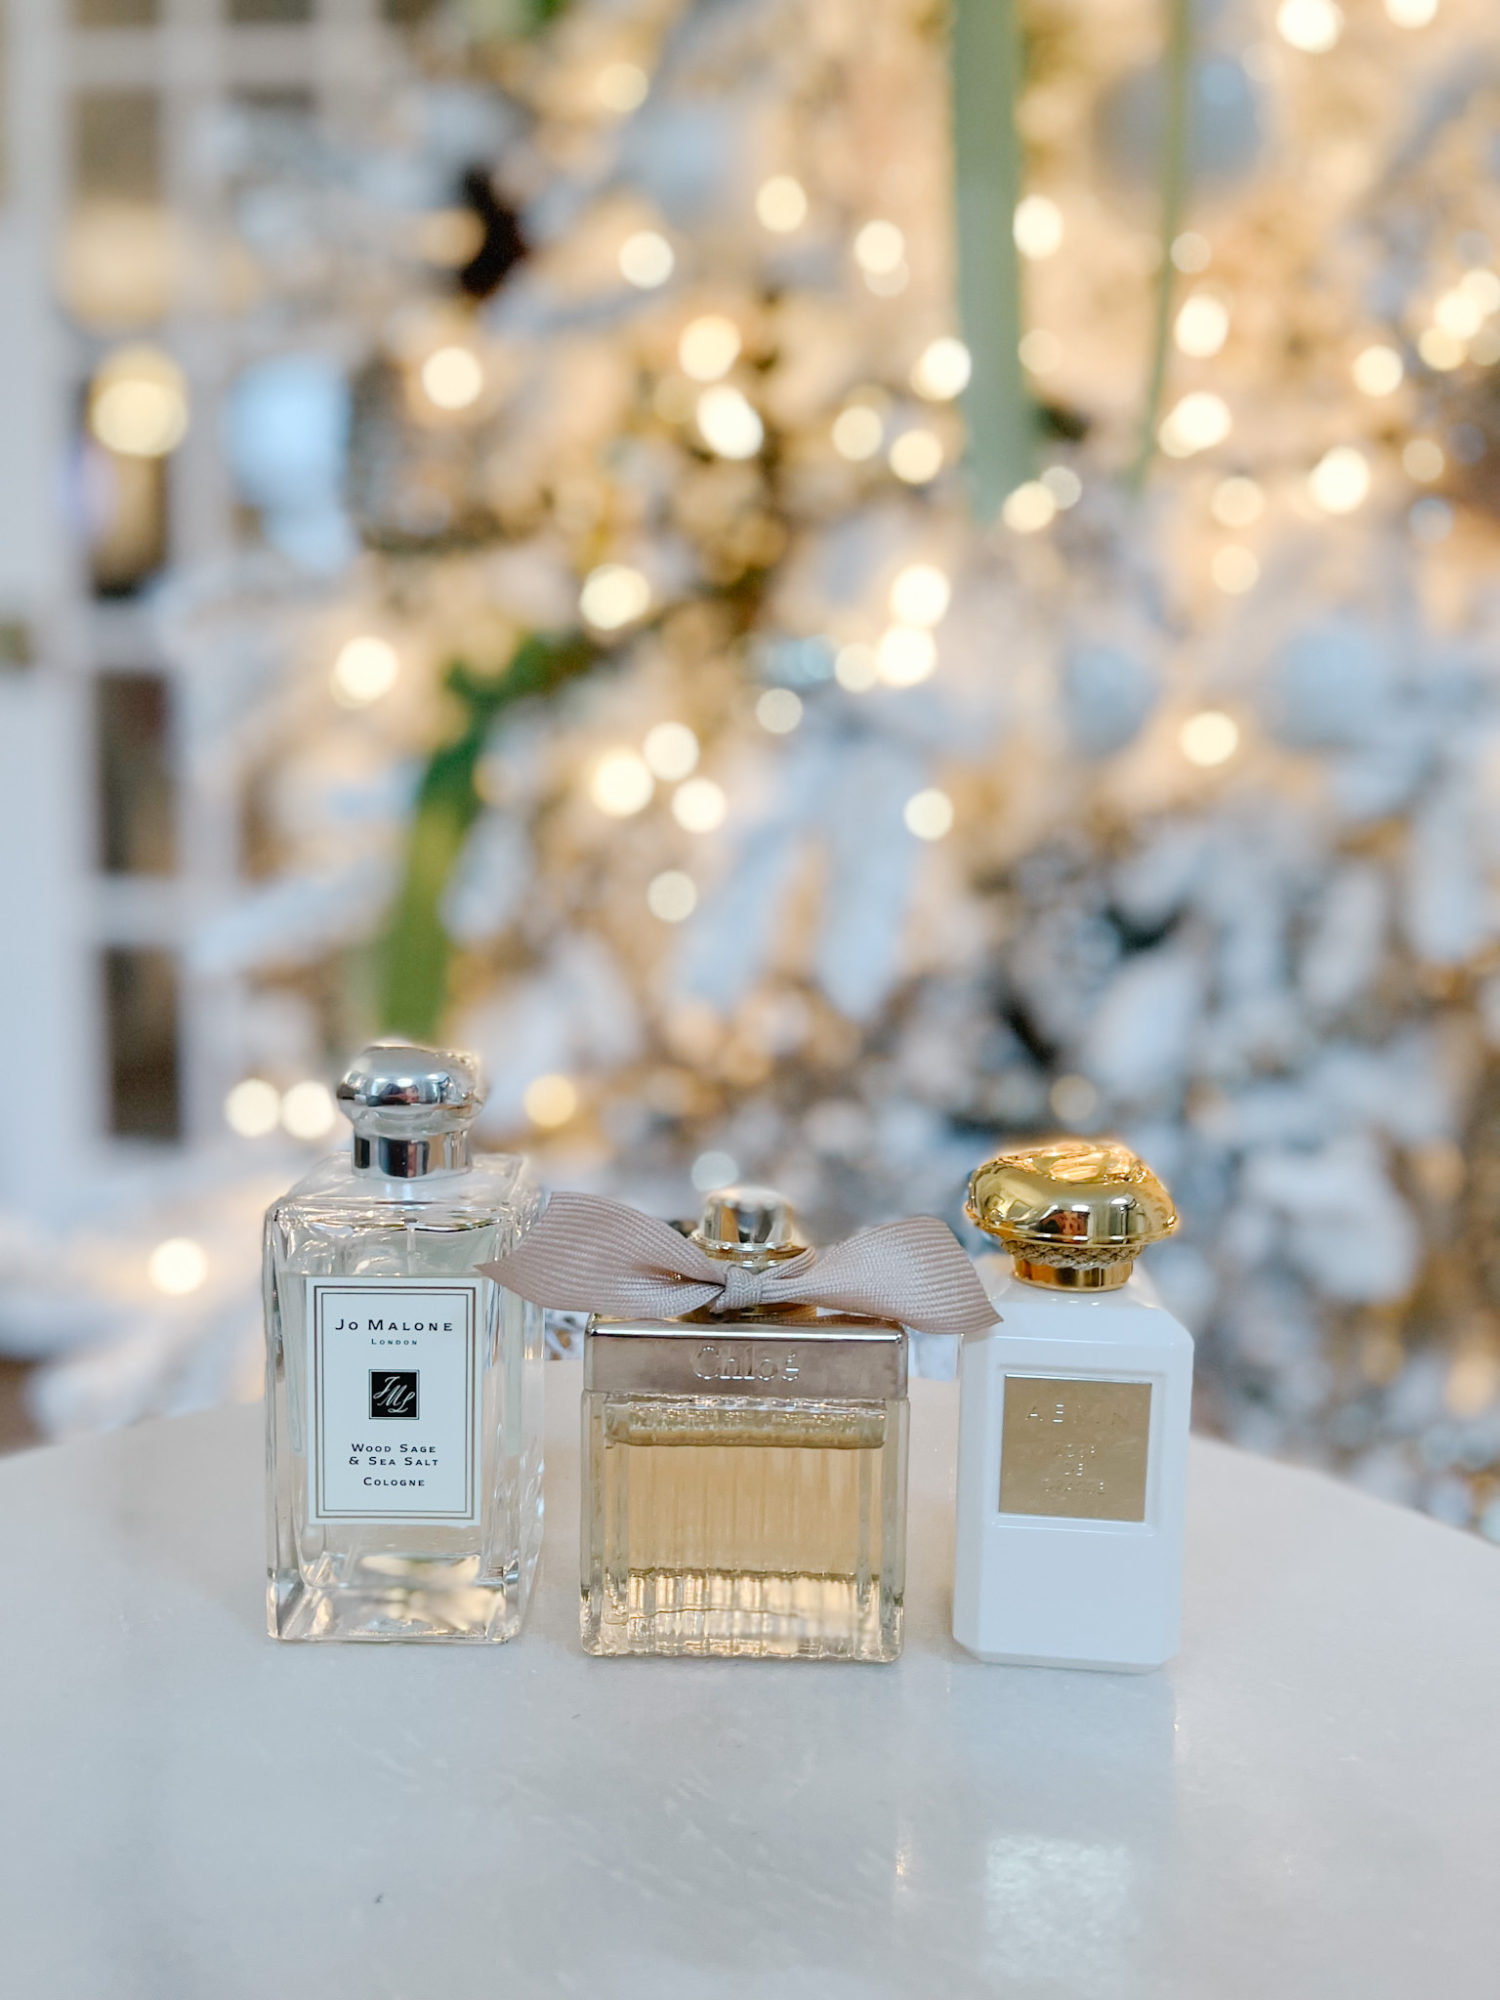 Sephora Fragrance for All Event 2023: Best Scents to Shop